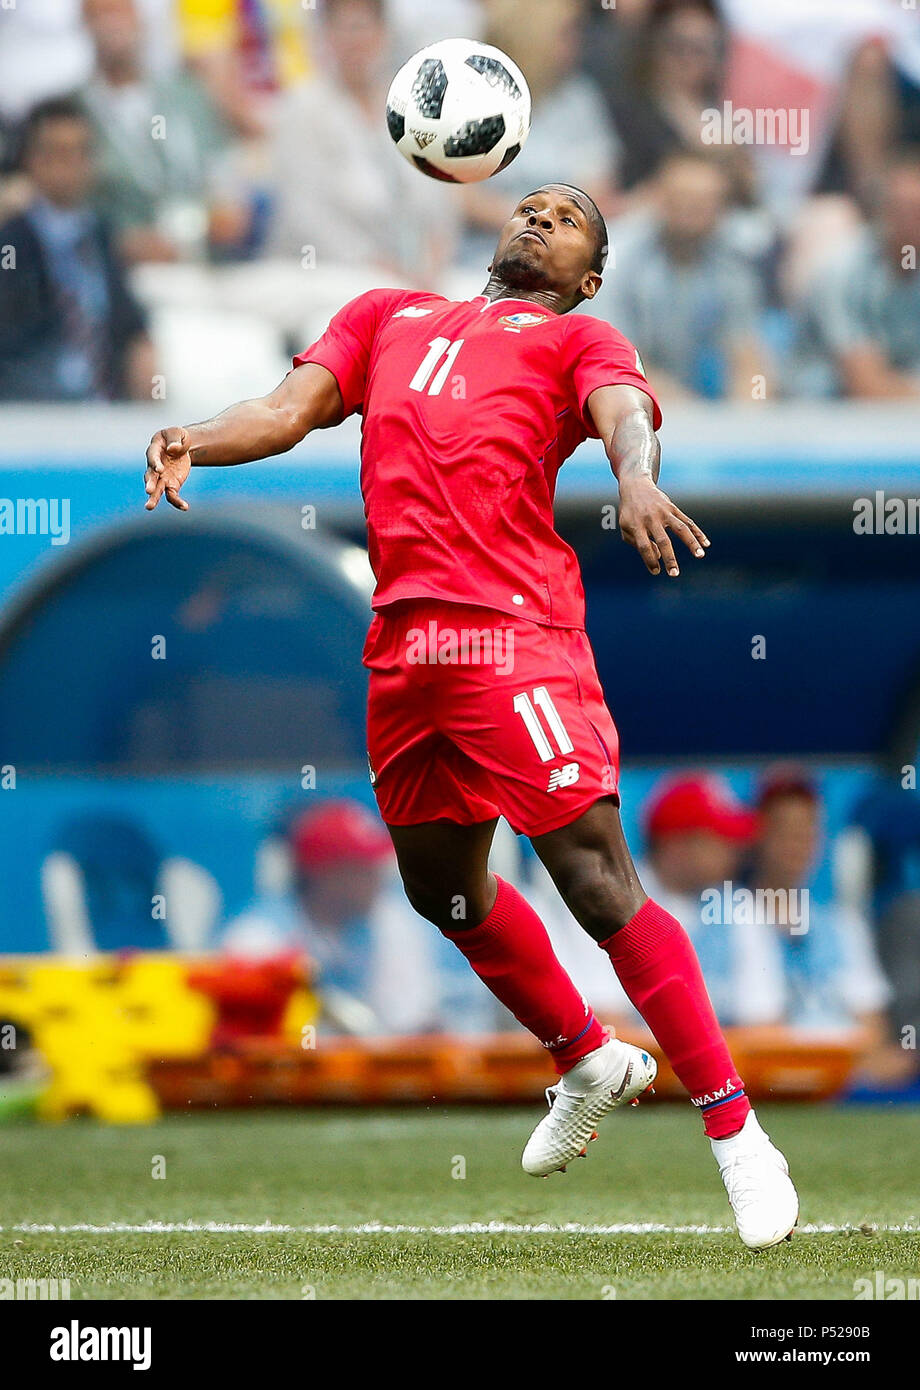 Nijni Novgorod, Russia. 24th June, 2018:ENGLAND VS. PANAMA - Armando Cooper of Panama during a match between England and Panama valid for the second round of group G of the 2018 World Cup, held at the Nizhny Novgorod stadium in the city of Nihzny Novgorod, Russia. (Photo: Marcelo Machado de Melo/Fotoarena) Credit: Foto Arena LTDA/Alamy Live News Stock Photo